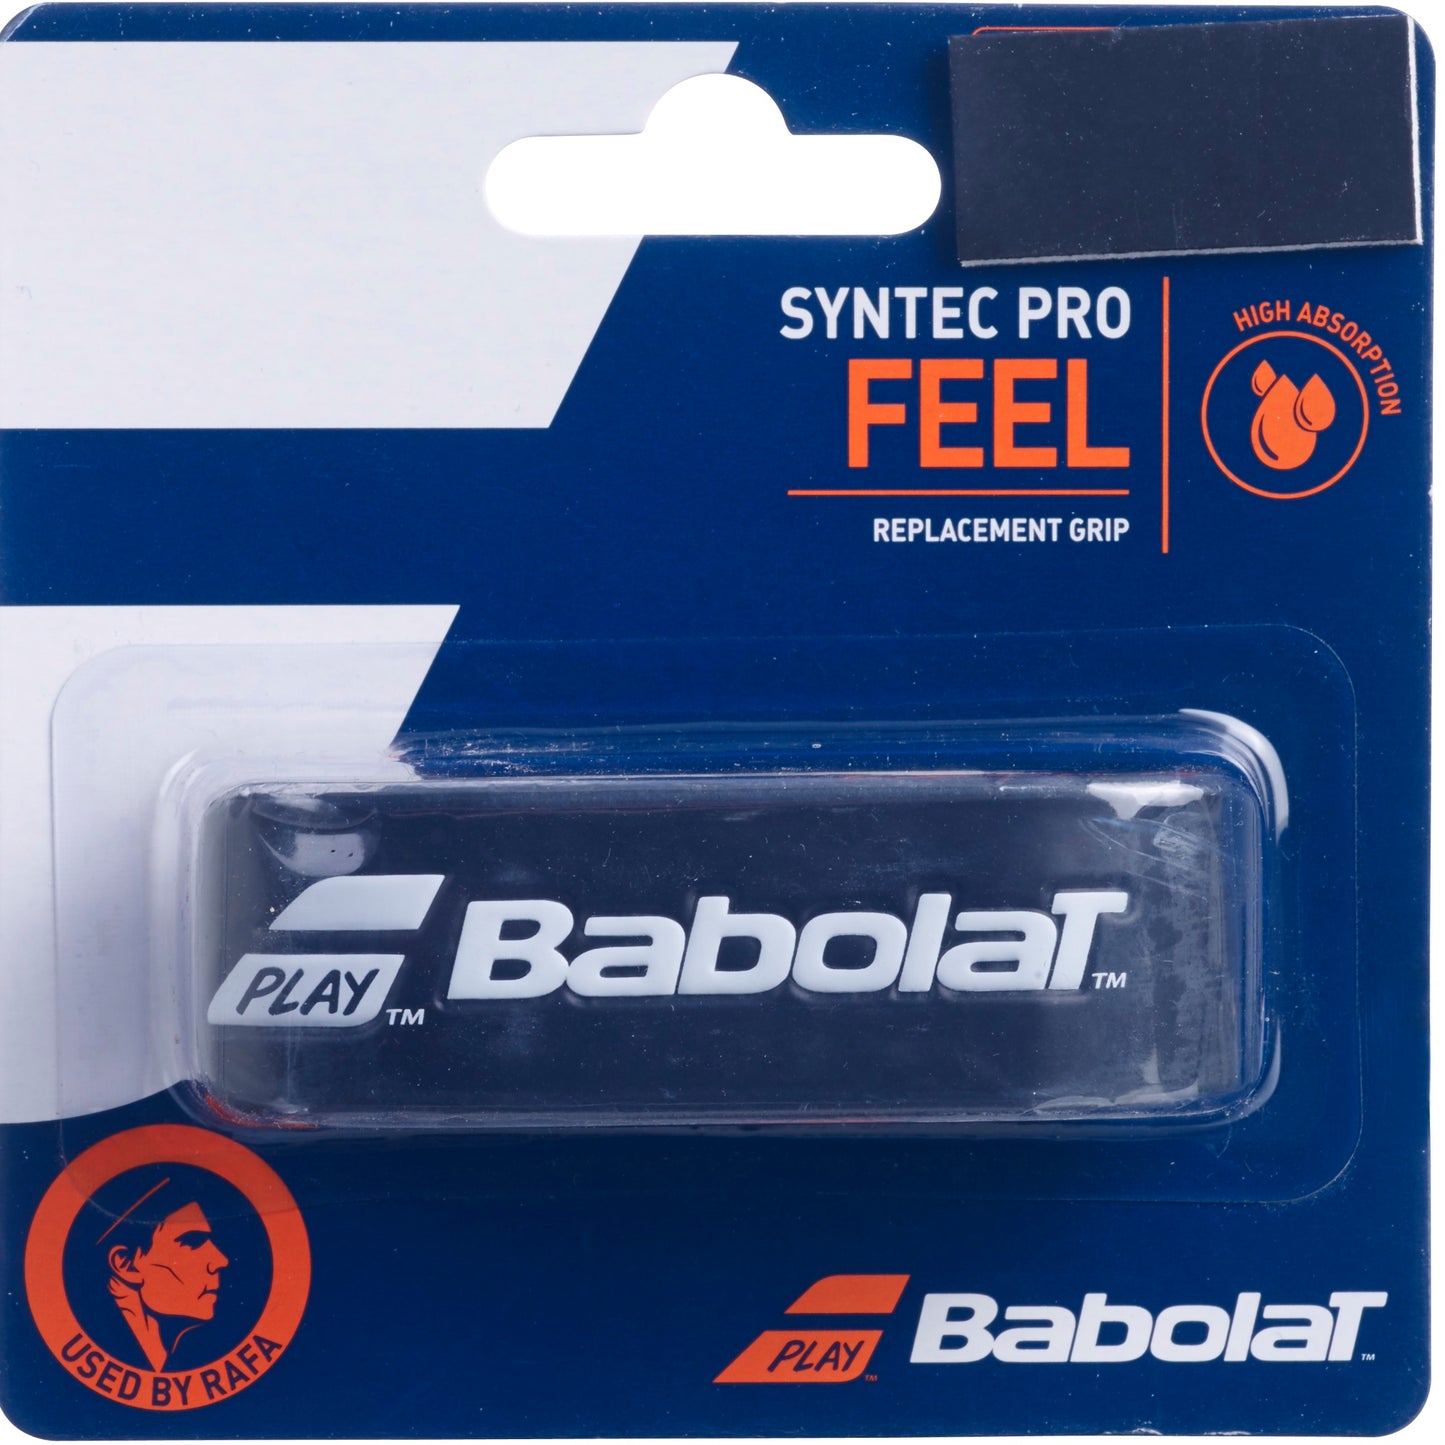 Babolat Syntec Pro replacement grip